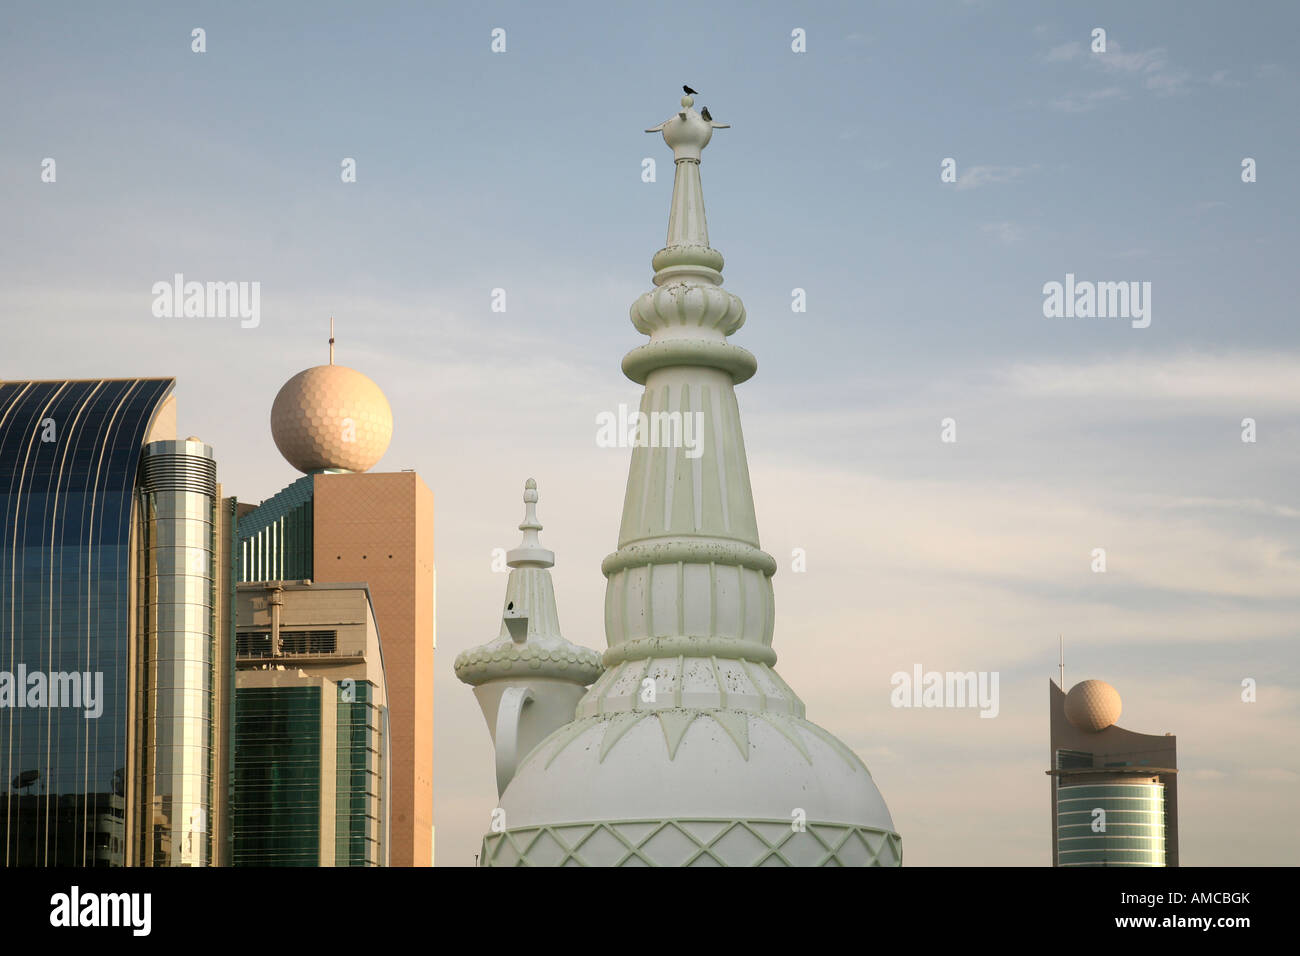 Skyscrapers and sculptures, Abu Dhabi city, UAE Stock Photo